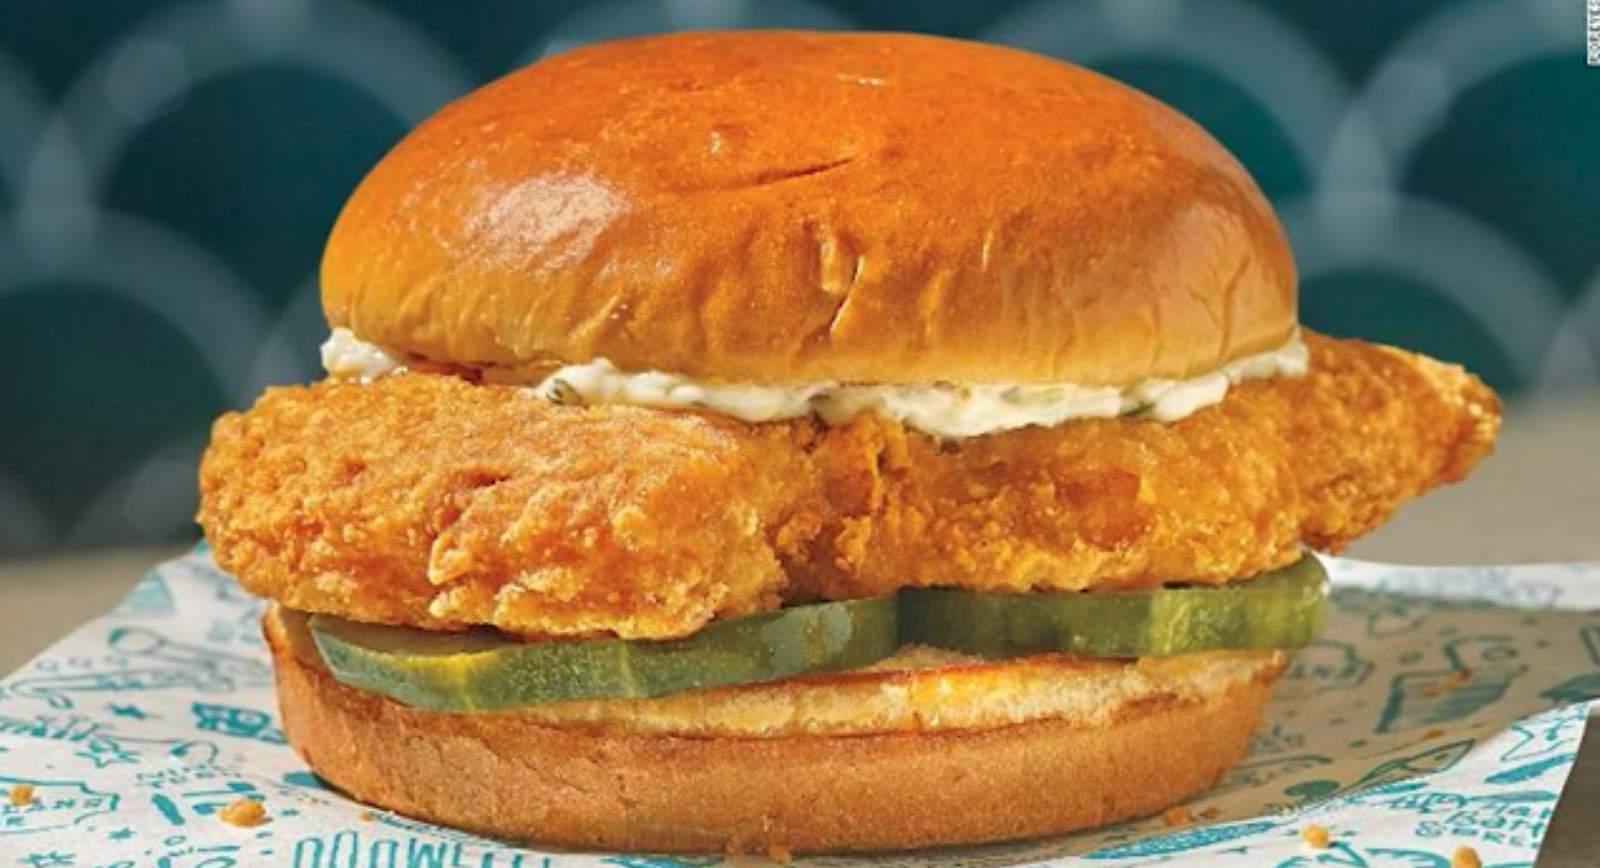 Popeyes introducing fried fish sandwich for limited time